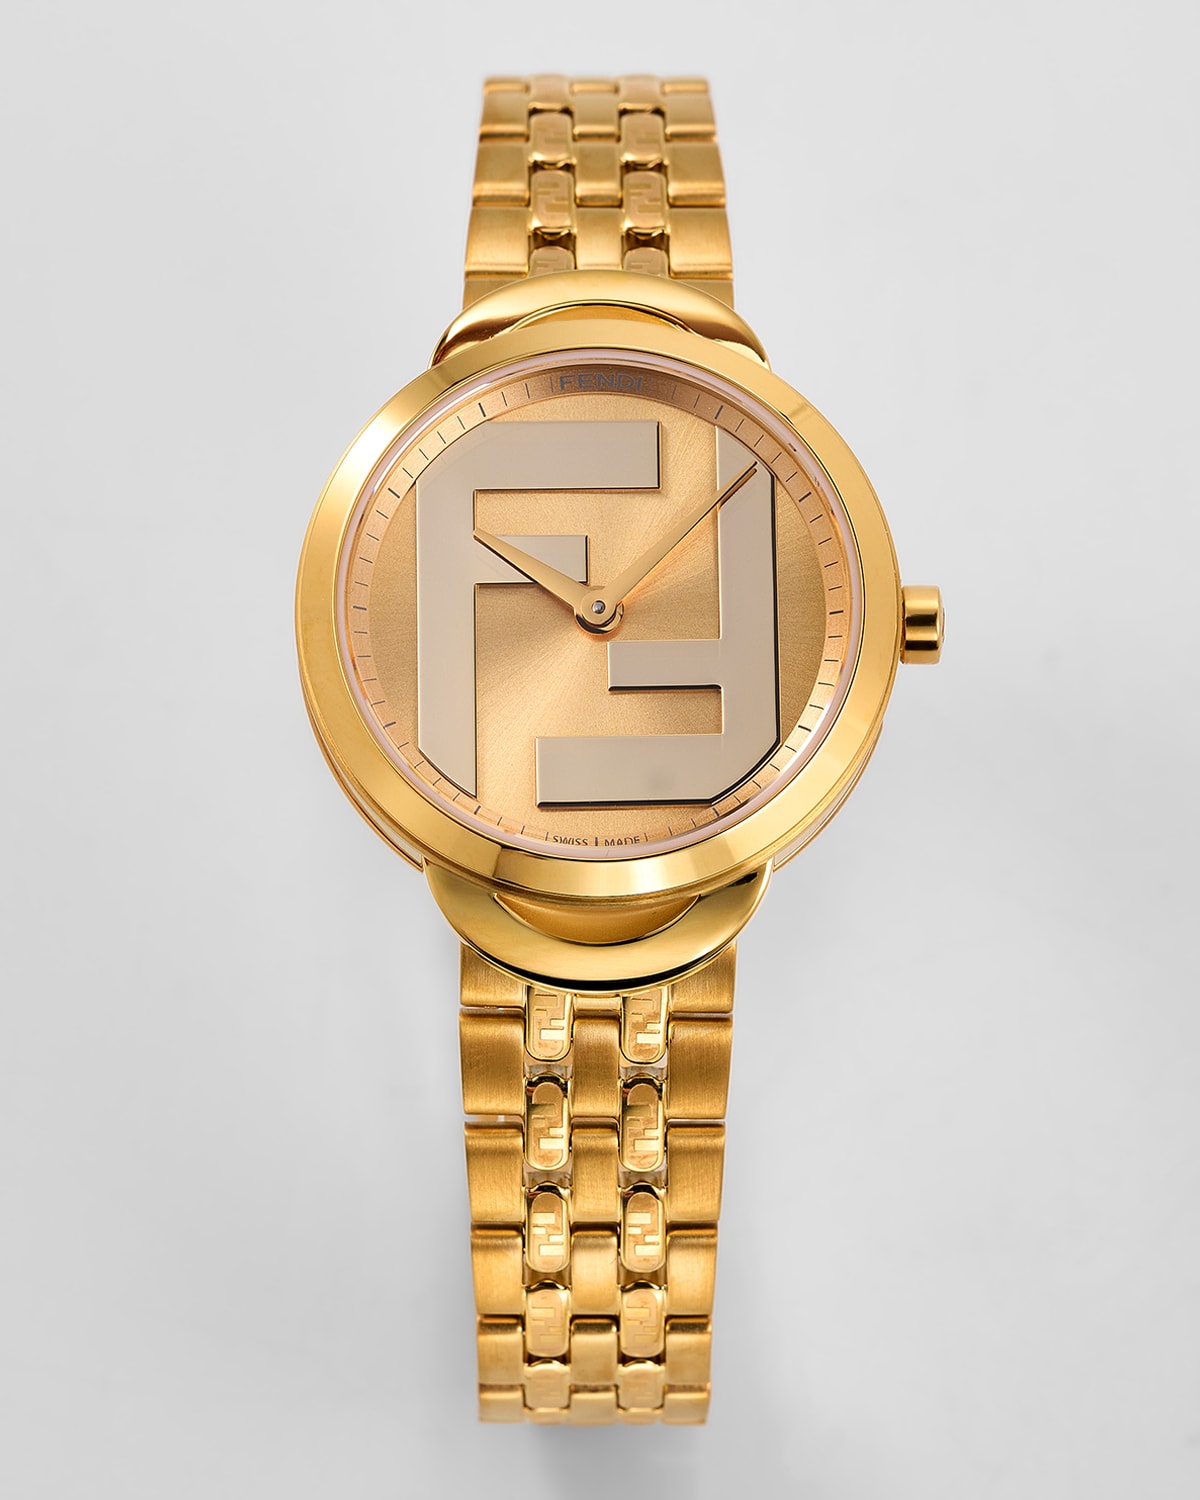 30mm PVD Sunray Watch with Bracelet Strap, Gold